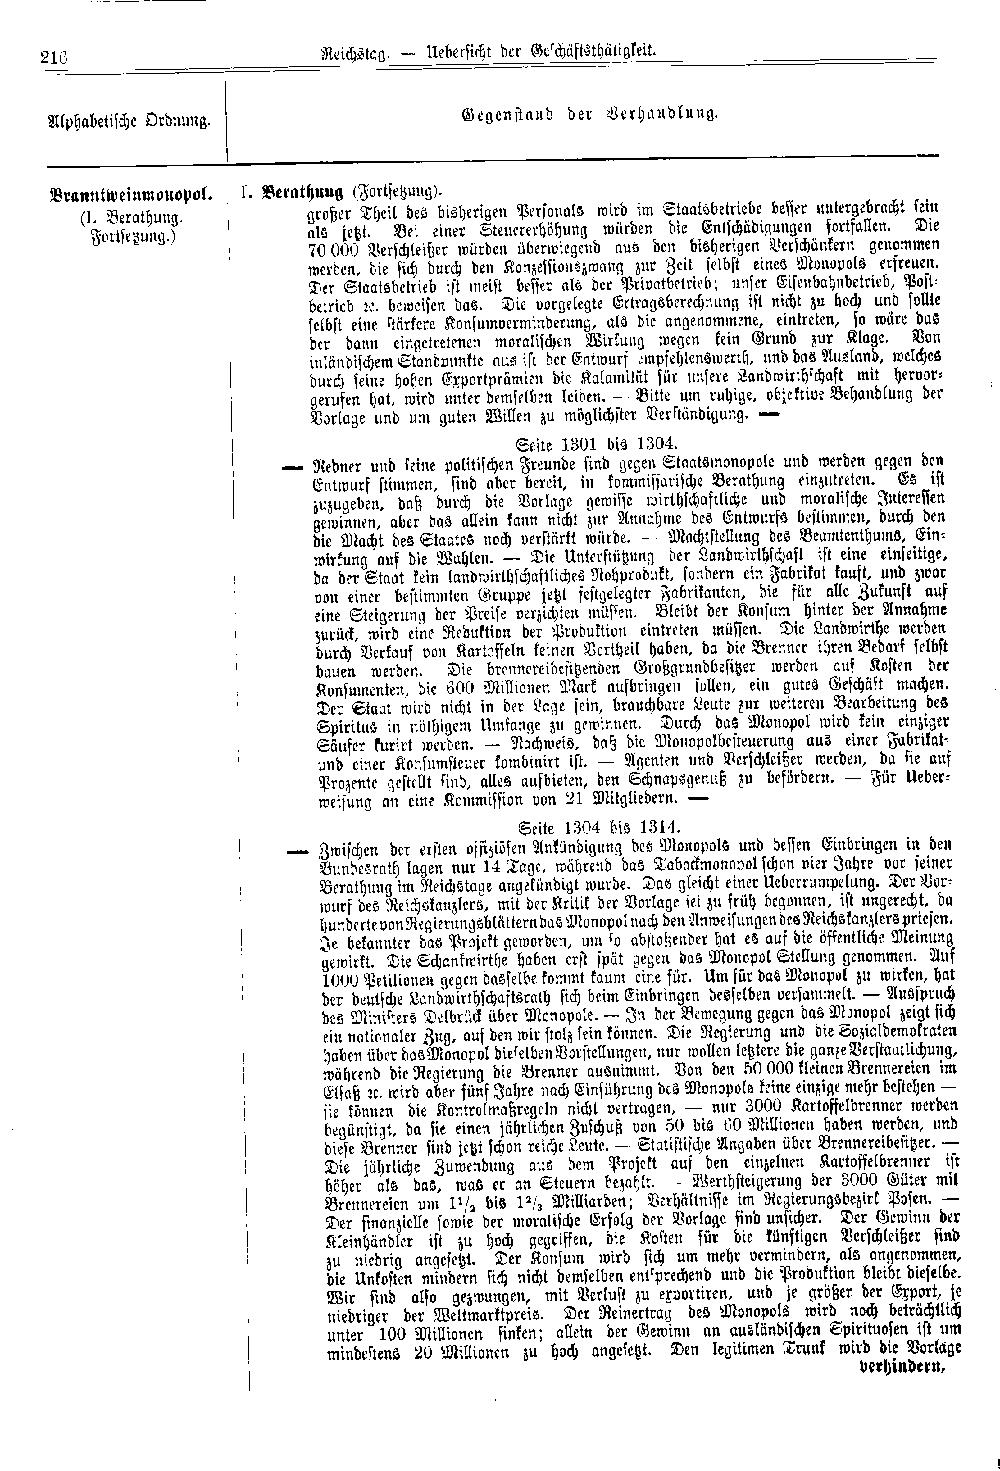 Scan of page 216